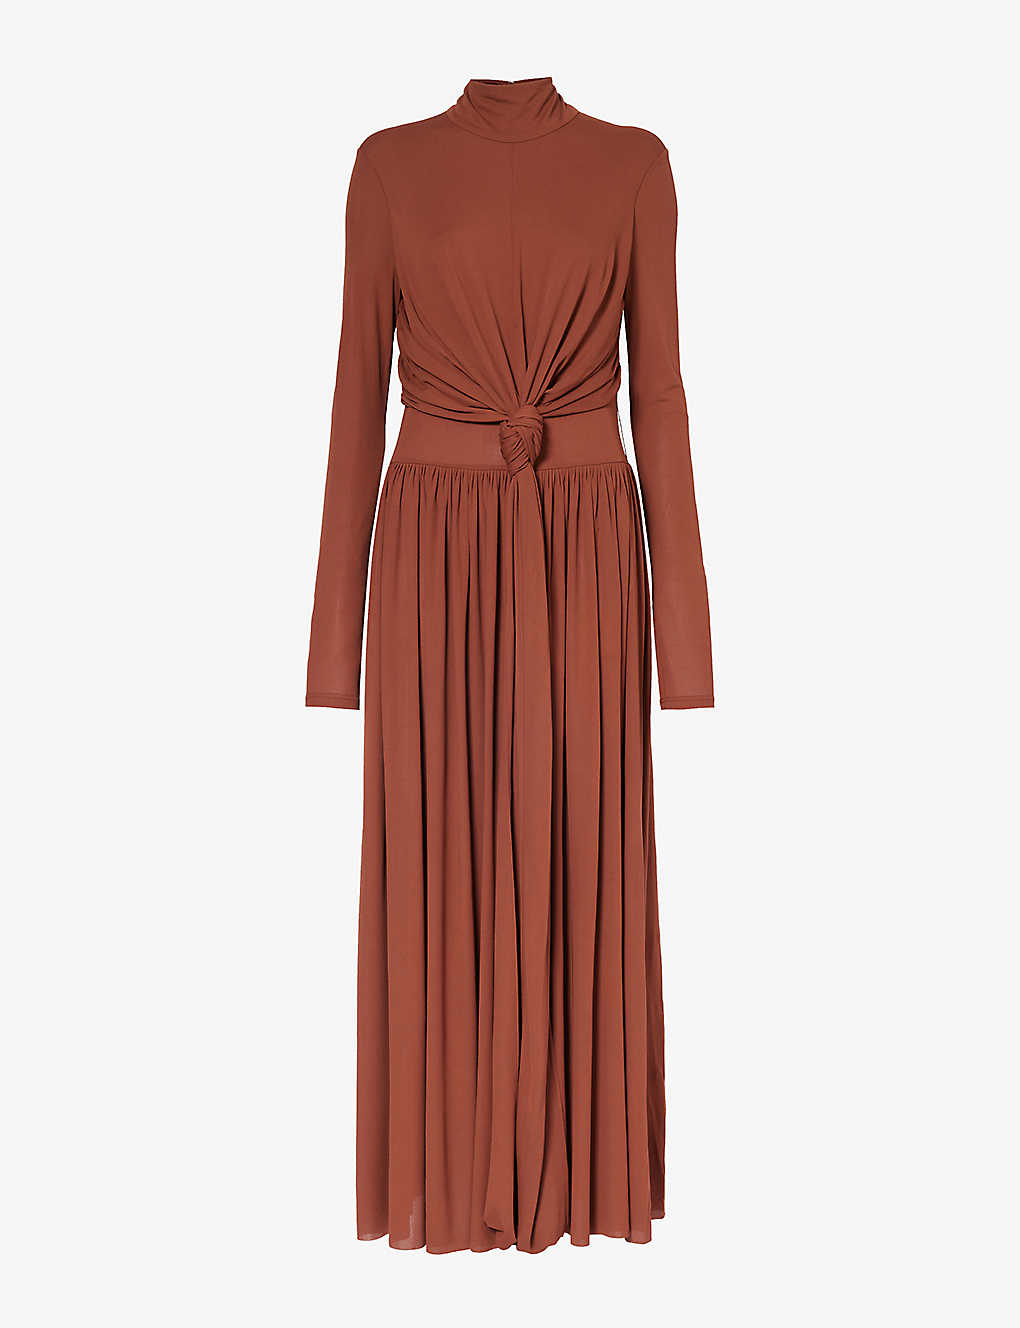 Shop Proenza Schouler Women's Tobacco Pleated-skirt Knotted Woven Maxi Dress